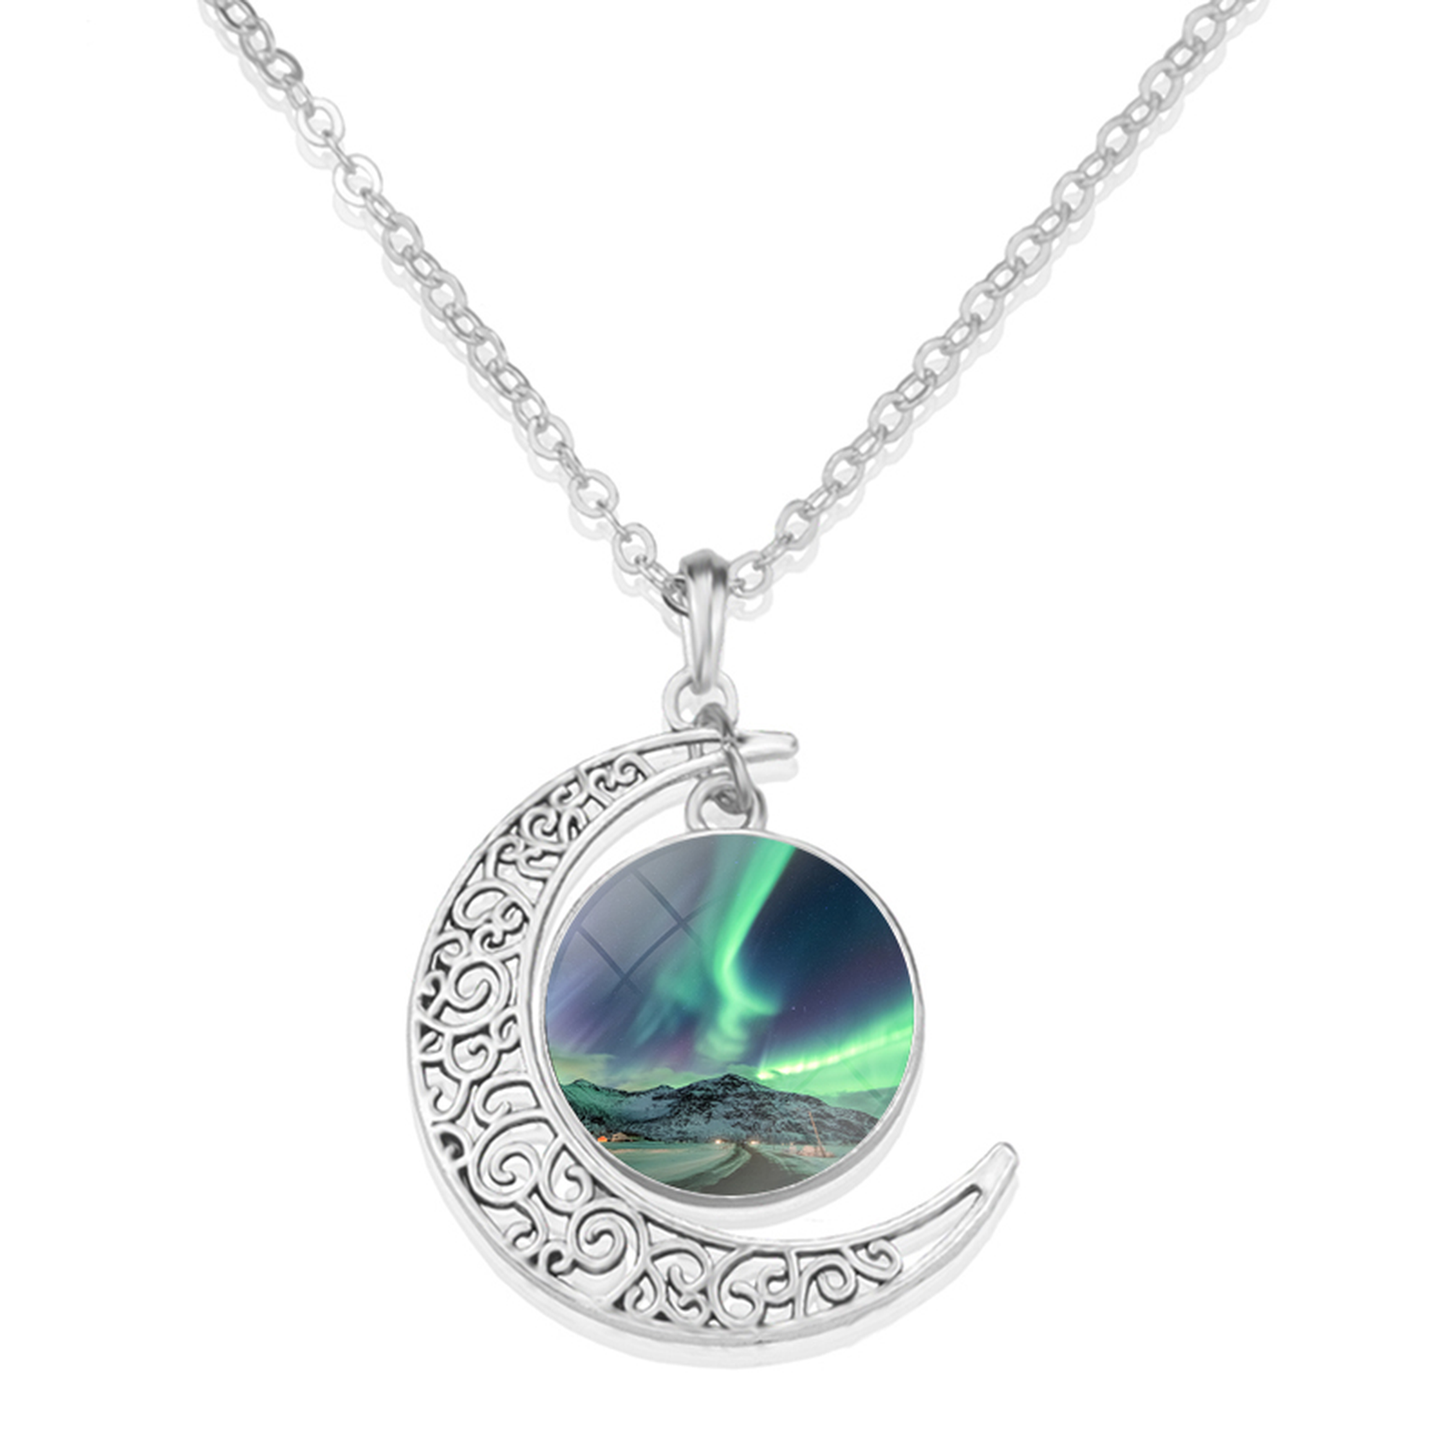 Unique Aurora Borealis Crescent Necklace - Northern Light Jewelry - Crescent Glass Cabochon Pendent Necklace - Perfect Aurora Lovers Gift 5